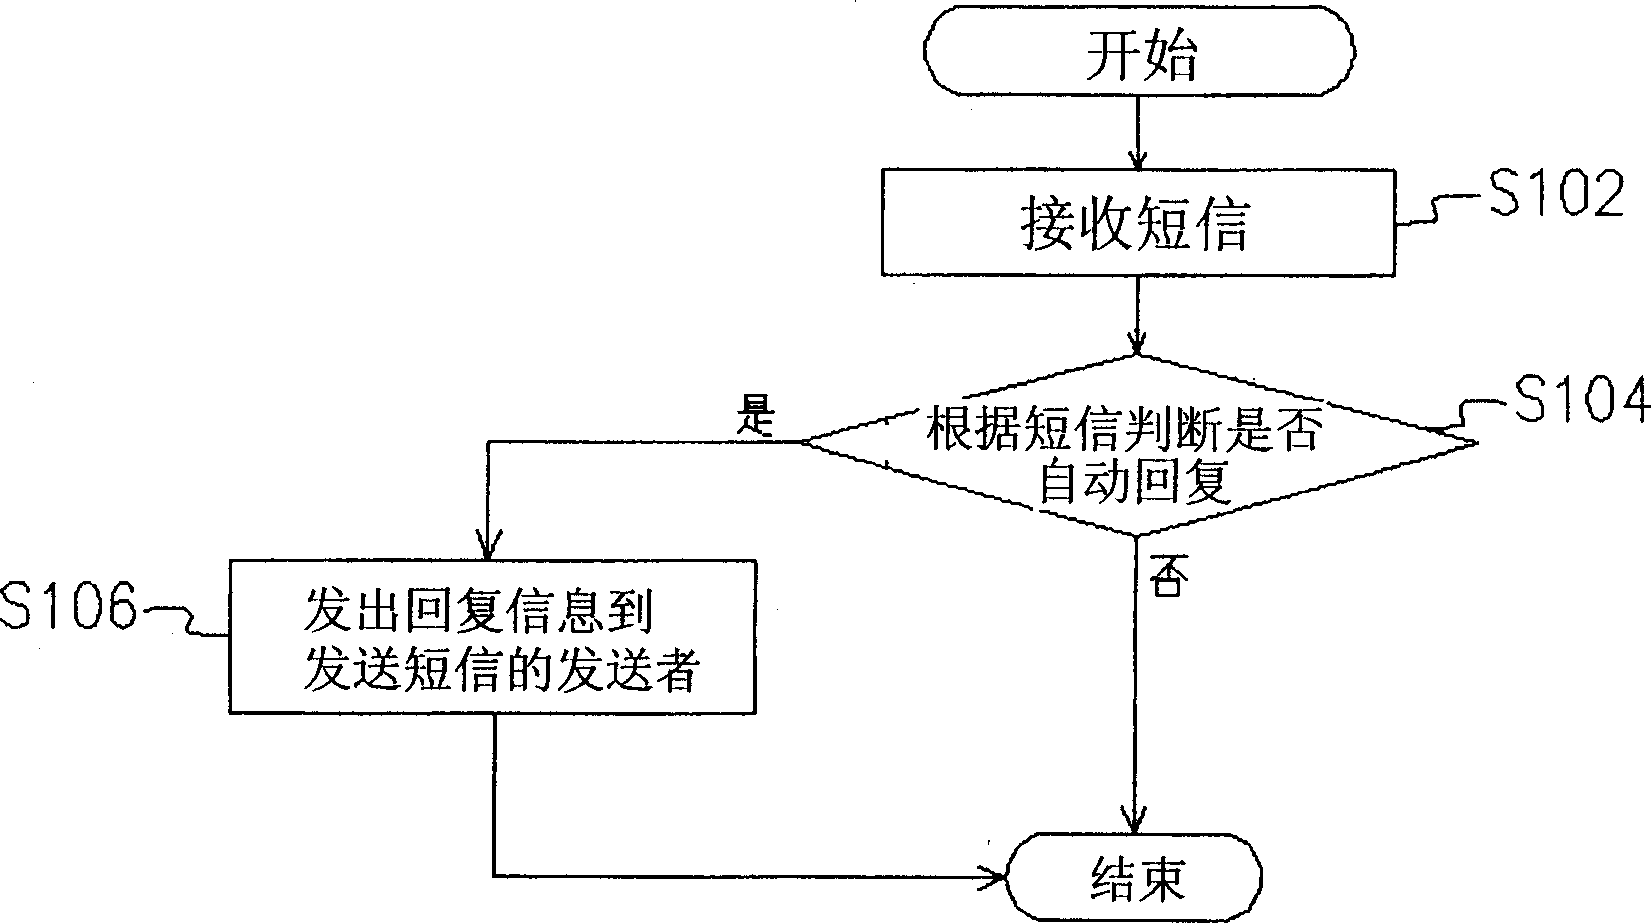 Automatic handset short message answering method